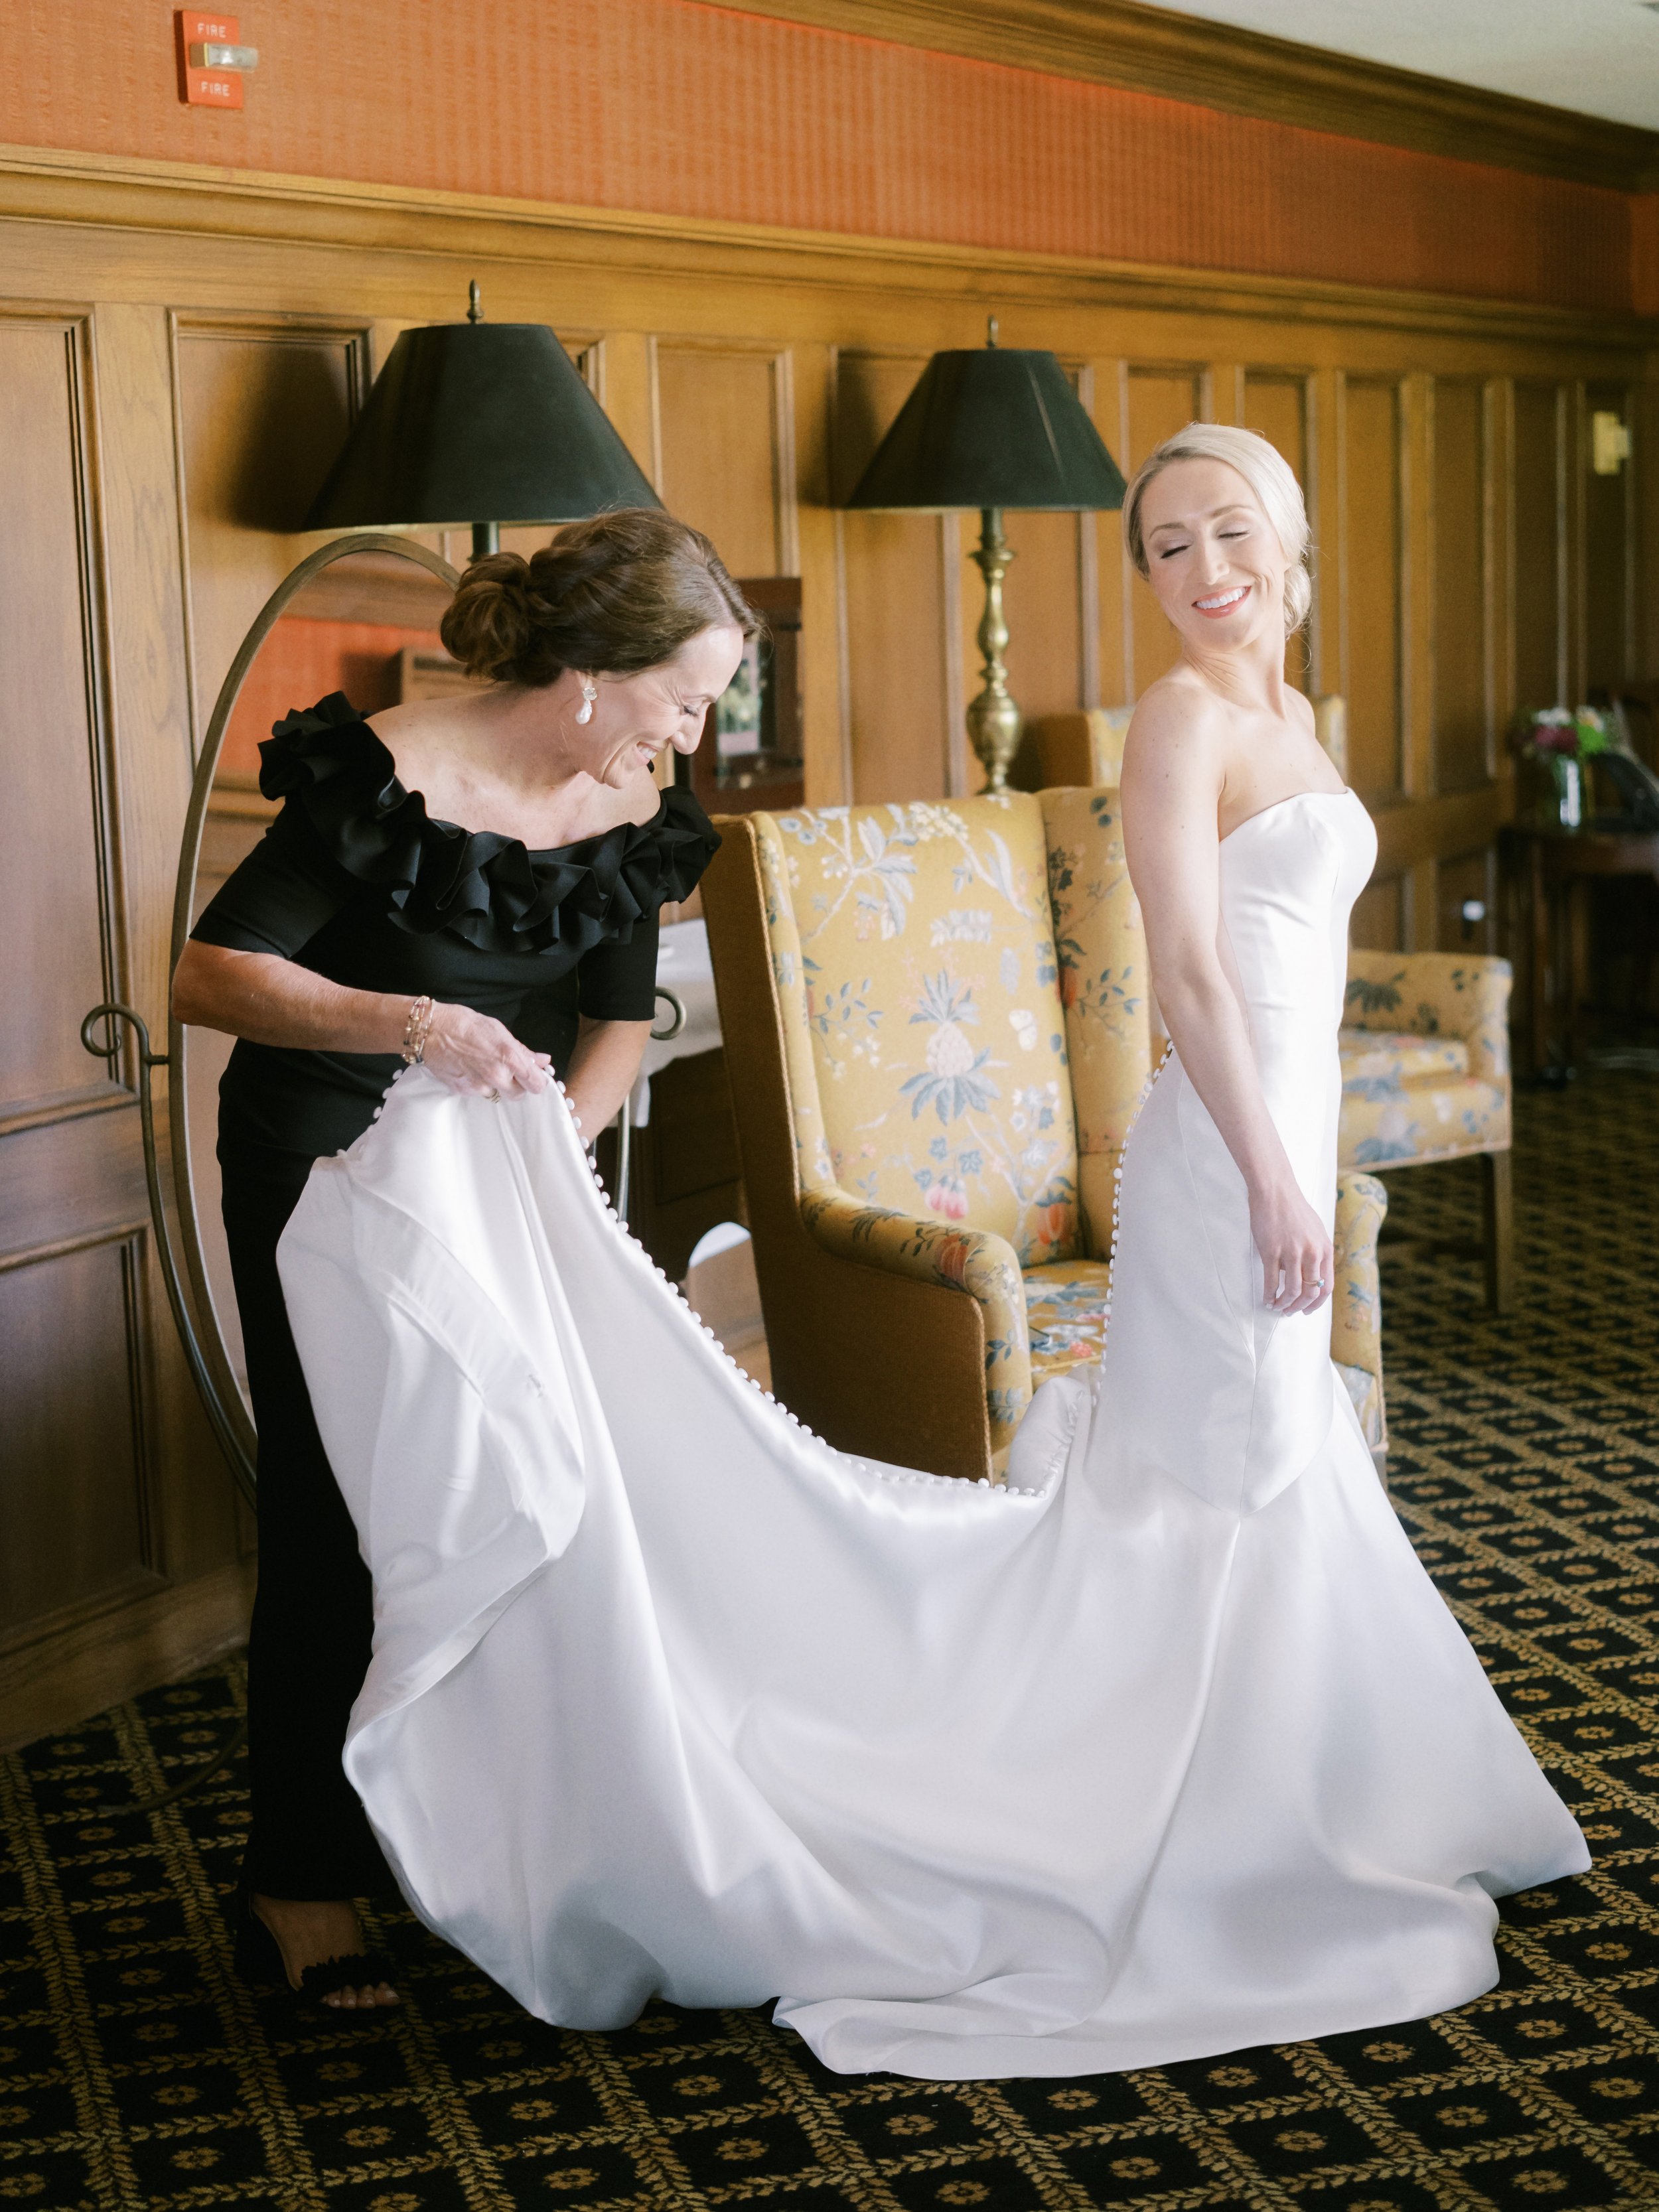  Wedding Photography by Claire Ryser 